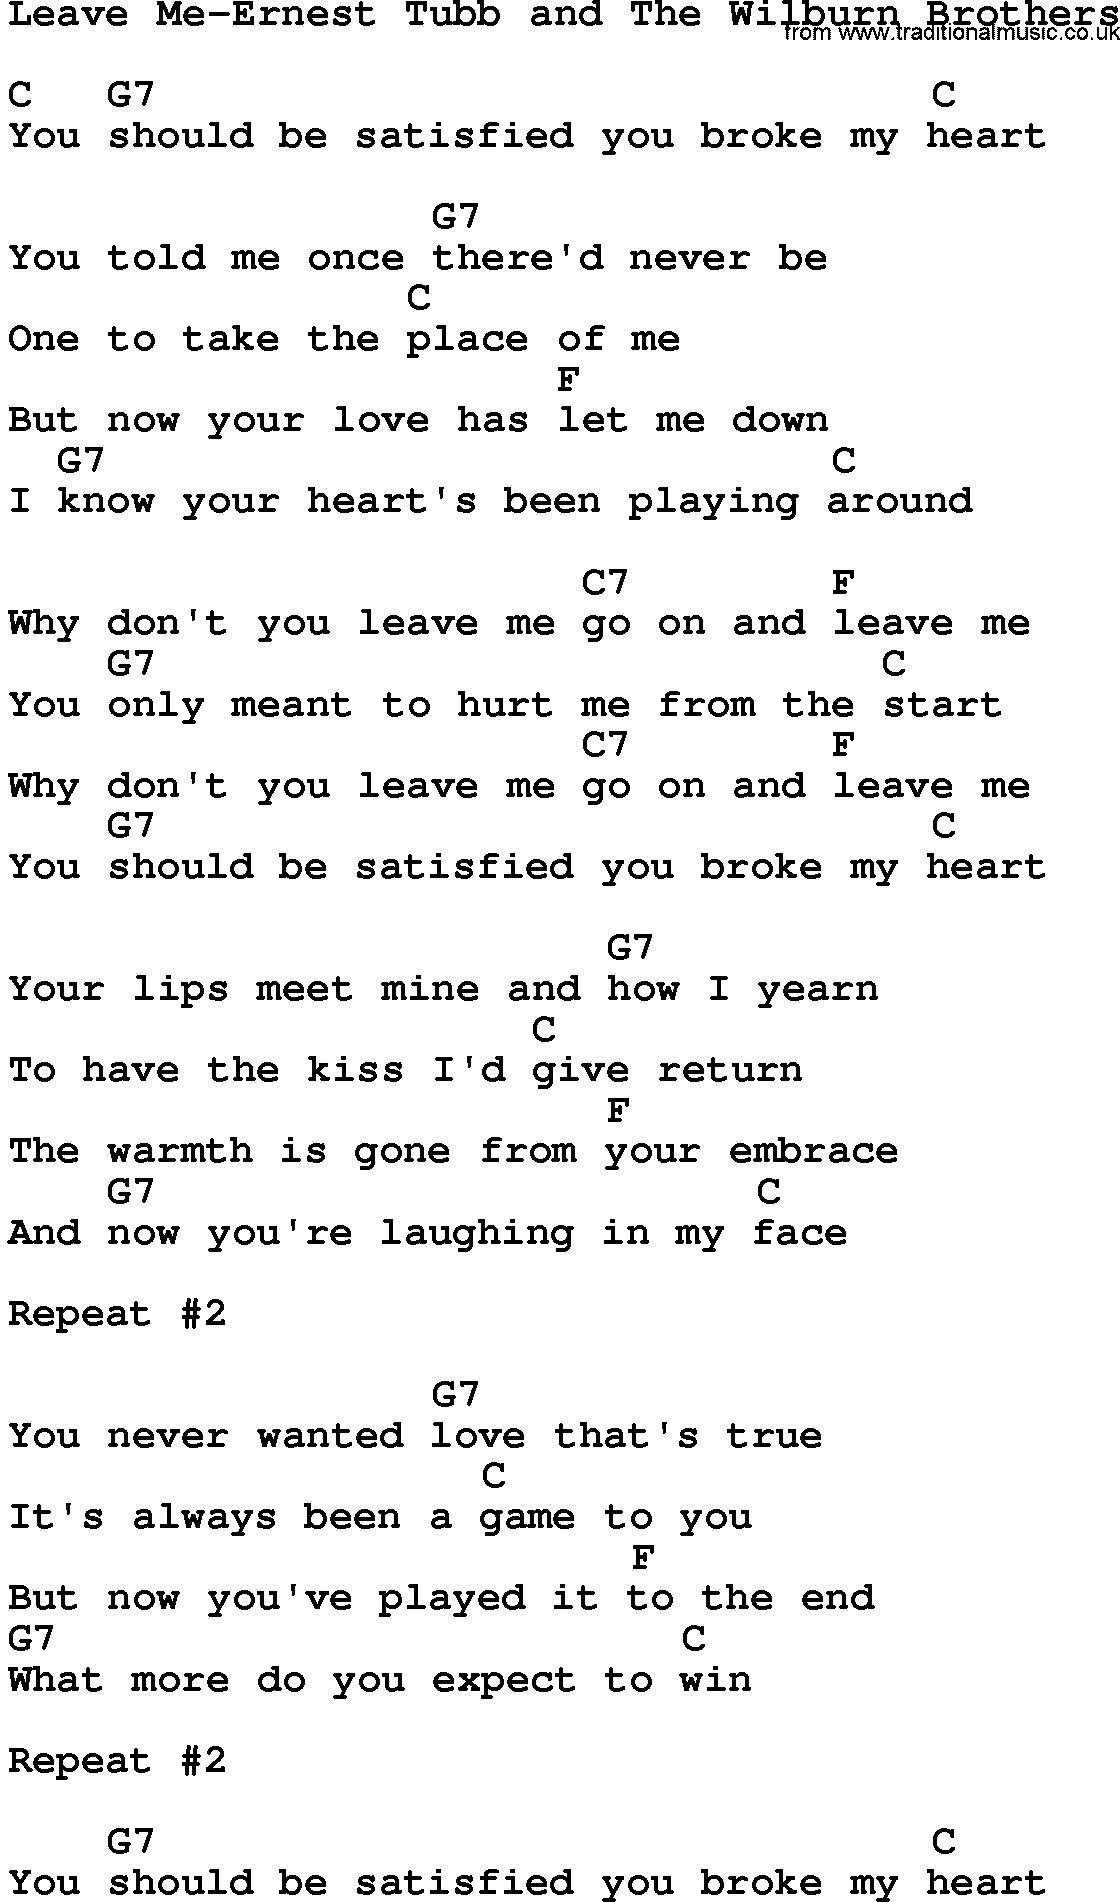 Country music song: Leave Me-Ernest Tubb And The Wilburn Brothers lyrics and chords